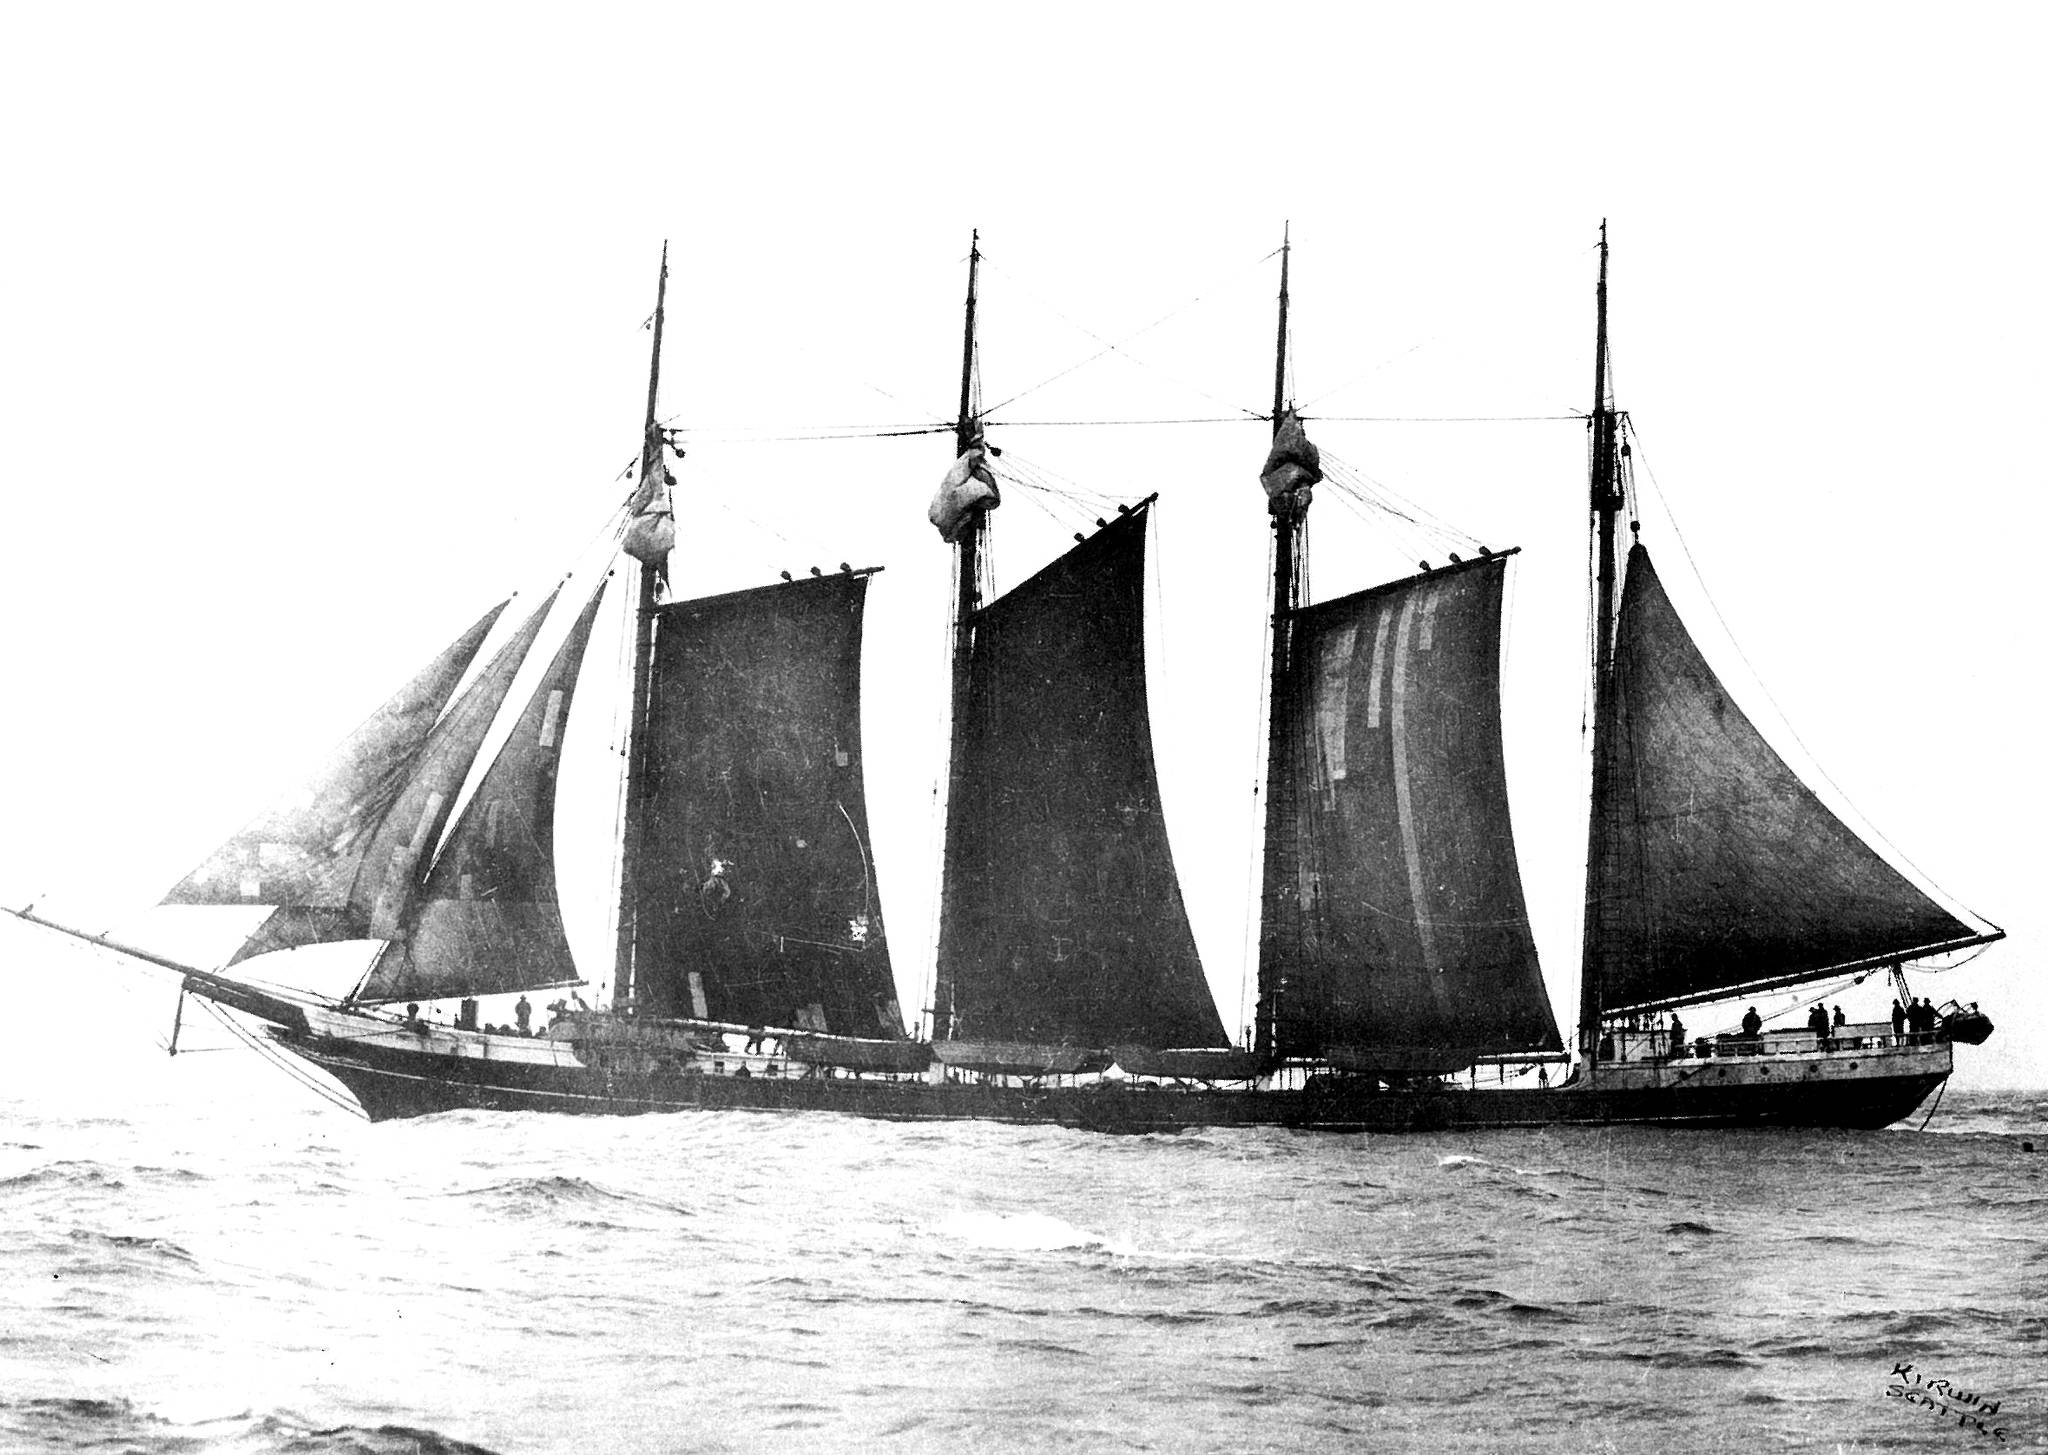 Shields’ beloved Sophie Christenson, a converted four-masted lumber schooner. At the beginning of the war, the US Army confiscated her, removed the masts and turned her into a barge. The Sophie was then towed to the Bering Sea and took part in the campaign to re-take the Aleutians from the Japanese. Shields’ bought her back after the war, but she was too far gone to restore and ended her days as a barge for a Canadian lumber company.